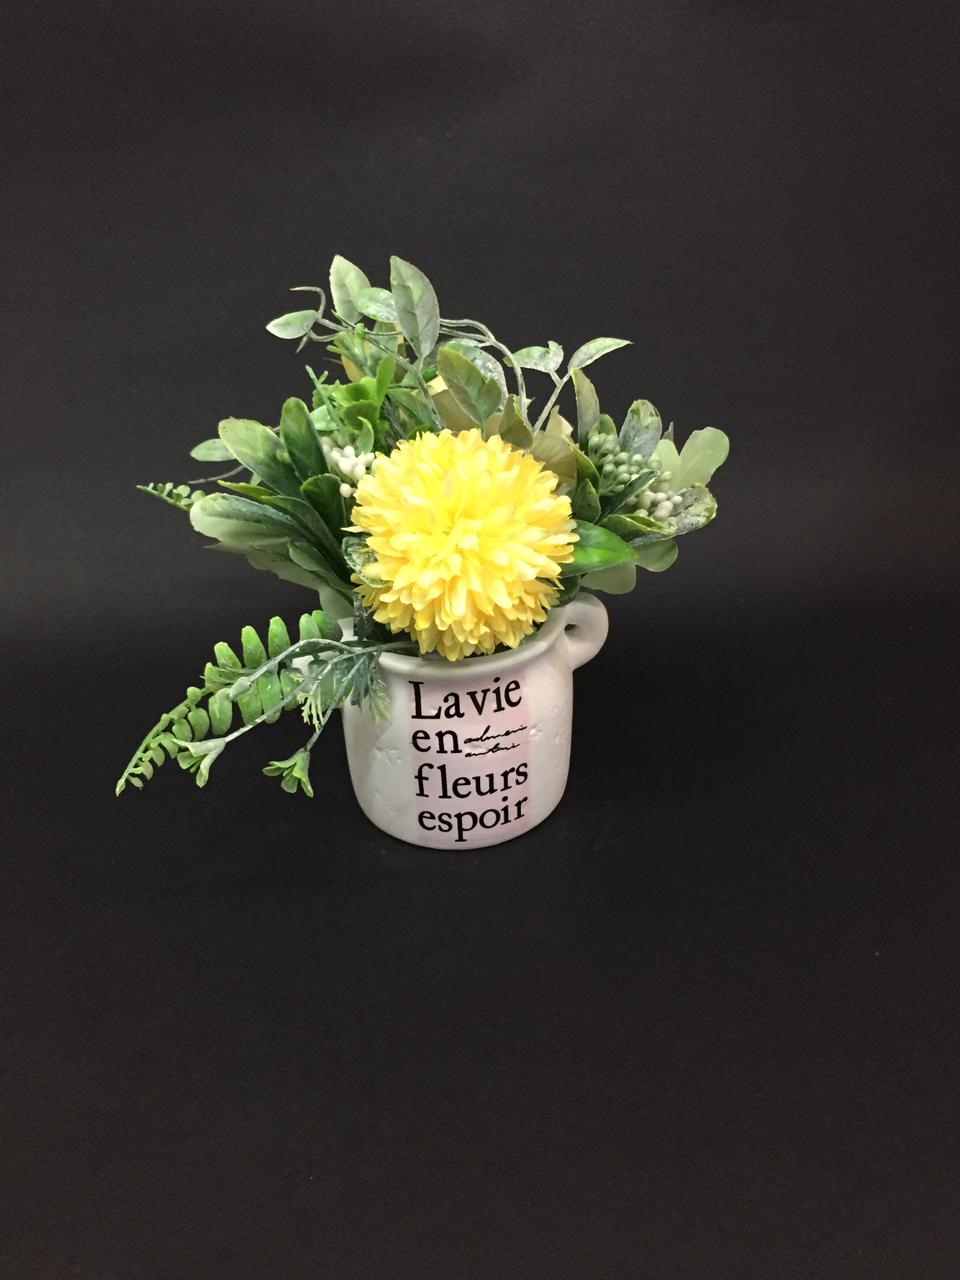 Life In Bloom Hope Quoted Pots With Floral Arrangement Décor By Tamrapatra